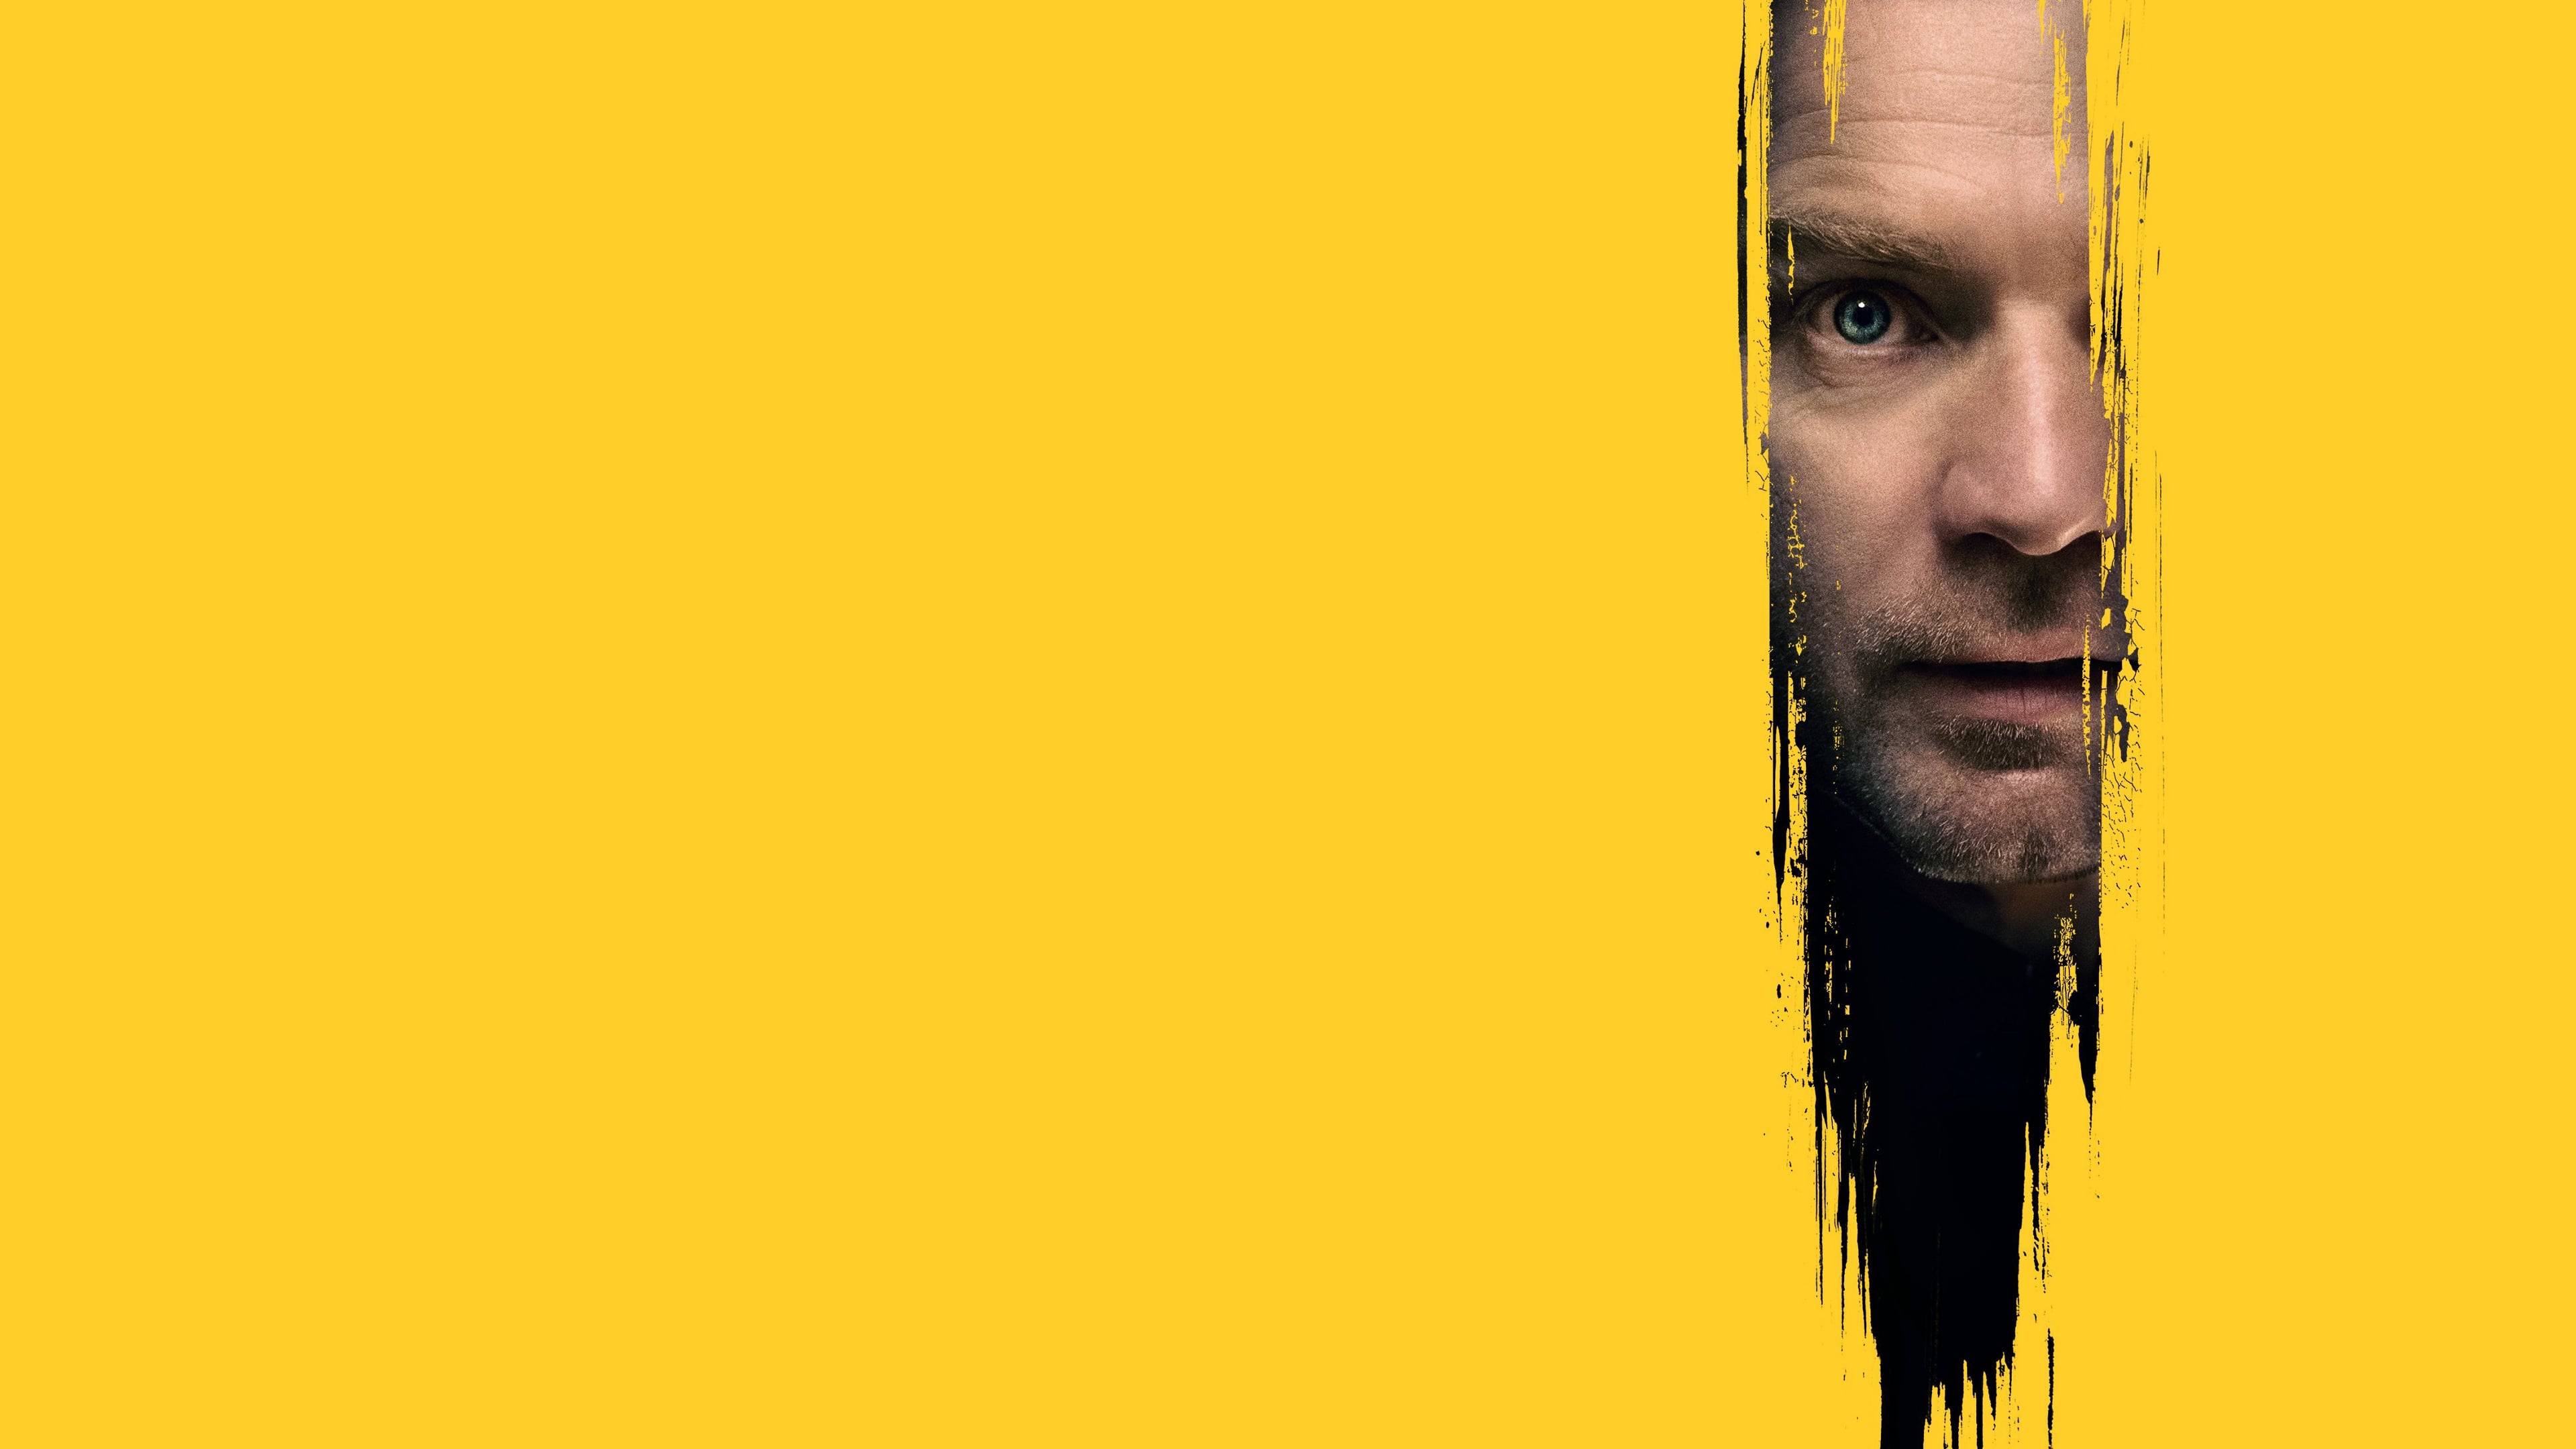 People 3840x2160 Doctor Sleep movies Stephen King The Shining Ewan McGregor yellow background face men simple background